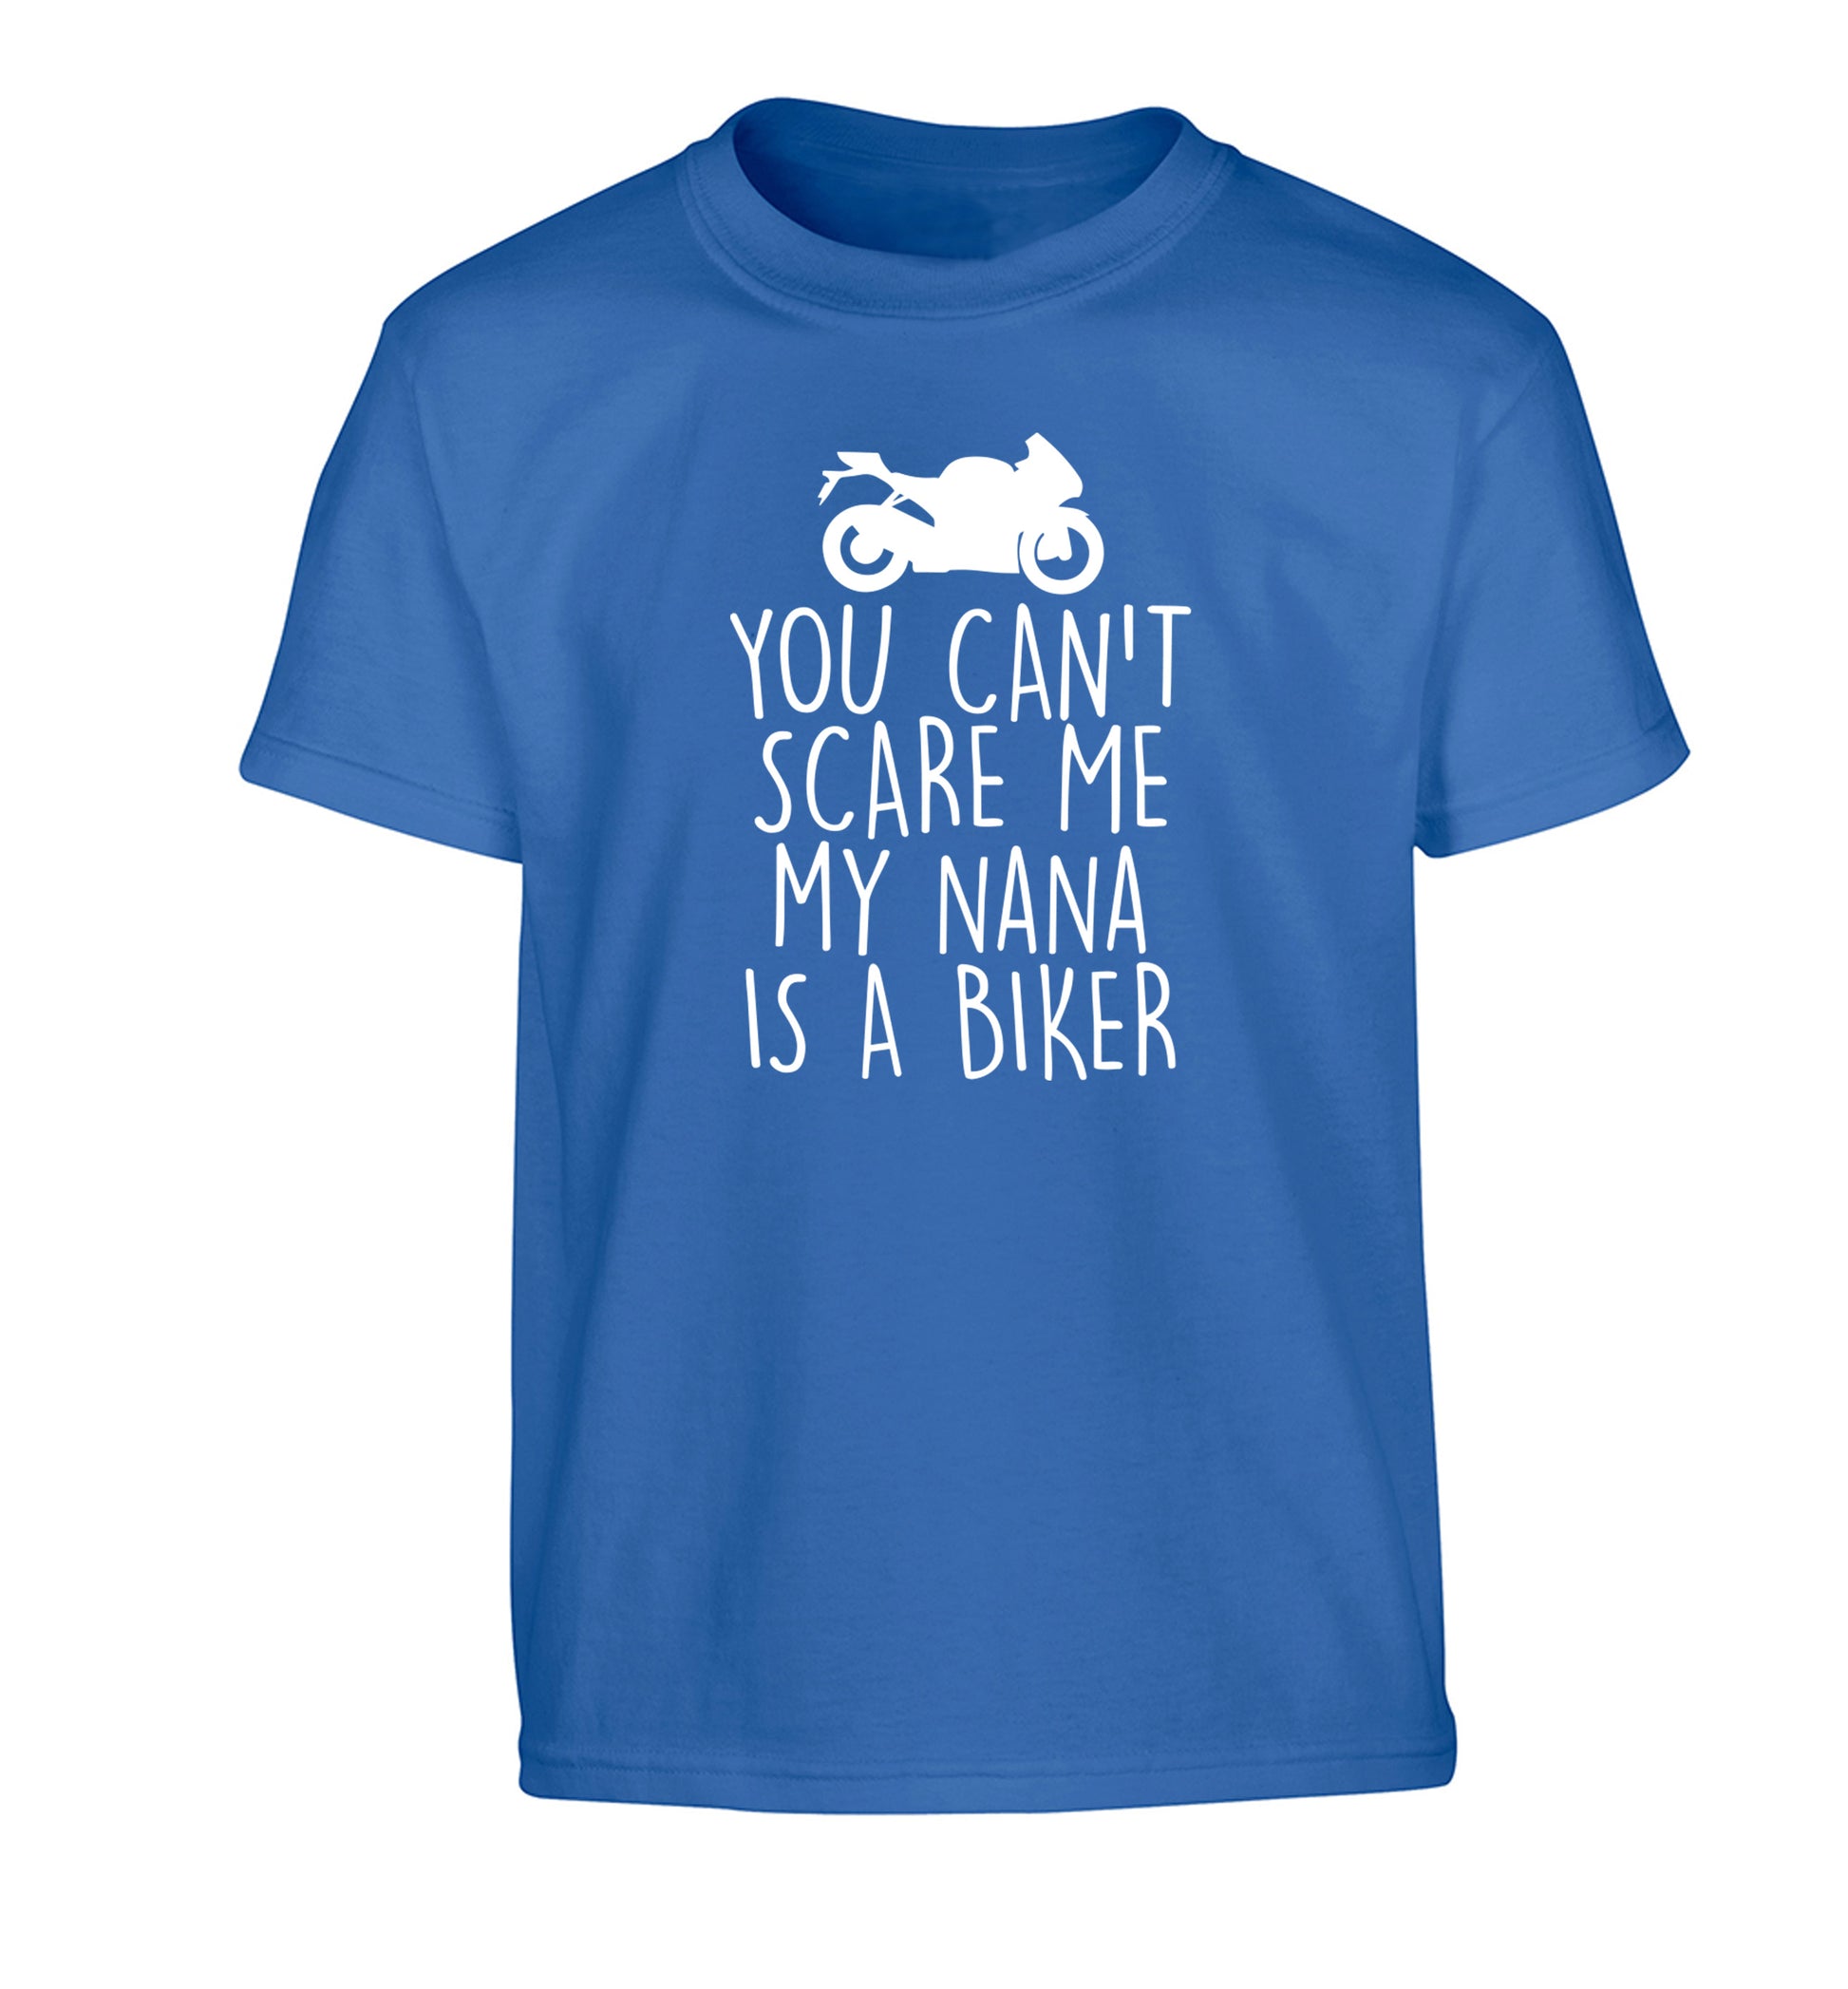 You can't scare me my nana is a biker Children's blue Tshirt 12-13 Years